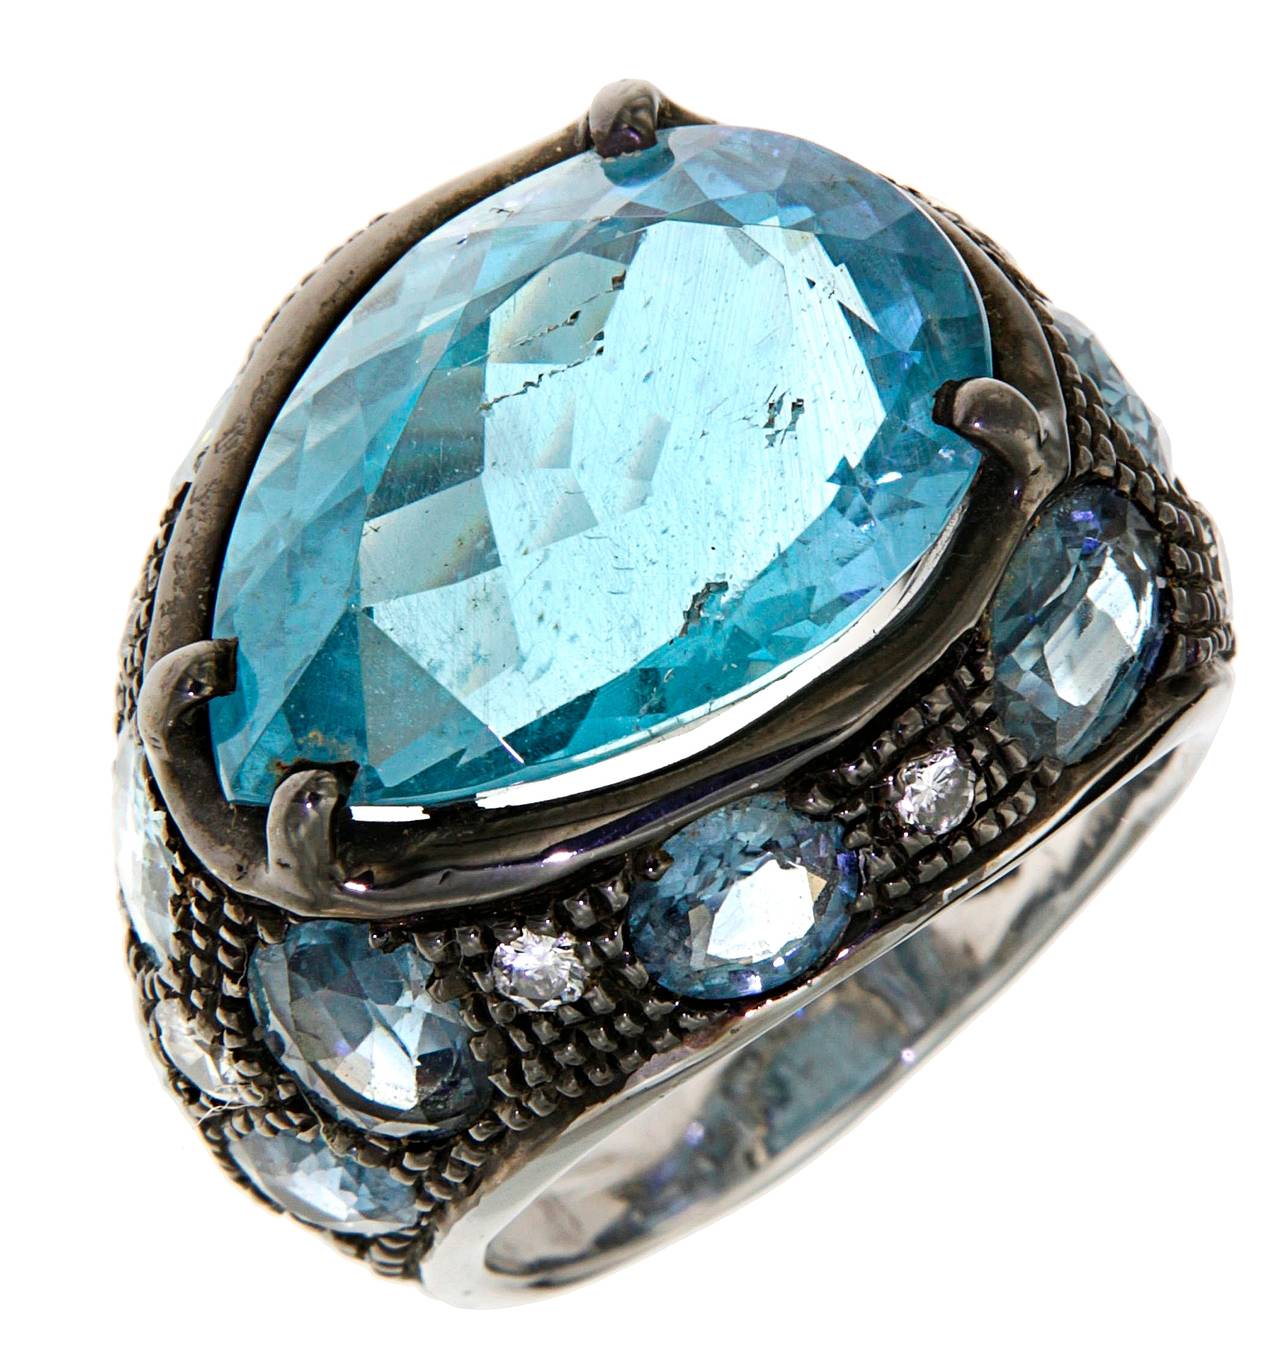 18 carat White Gold Ring with extraordinary Blue Drop-shaped Aquamarine 11.21 carat, Sapphires 8.60 carat and Diamonds 0.40 carat.
Finger Size 6 1/2, can be resized.